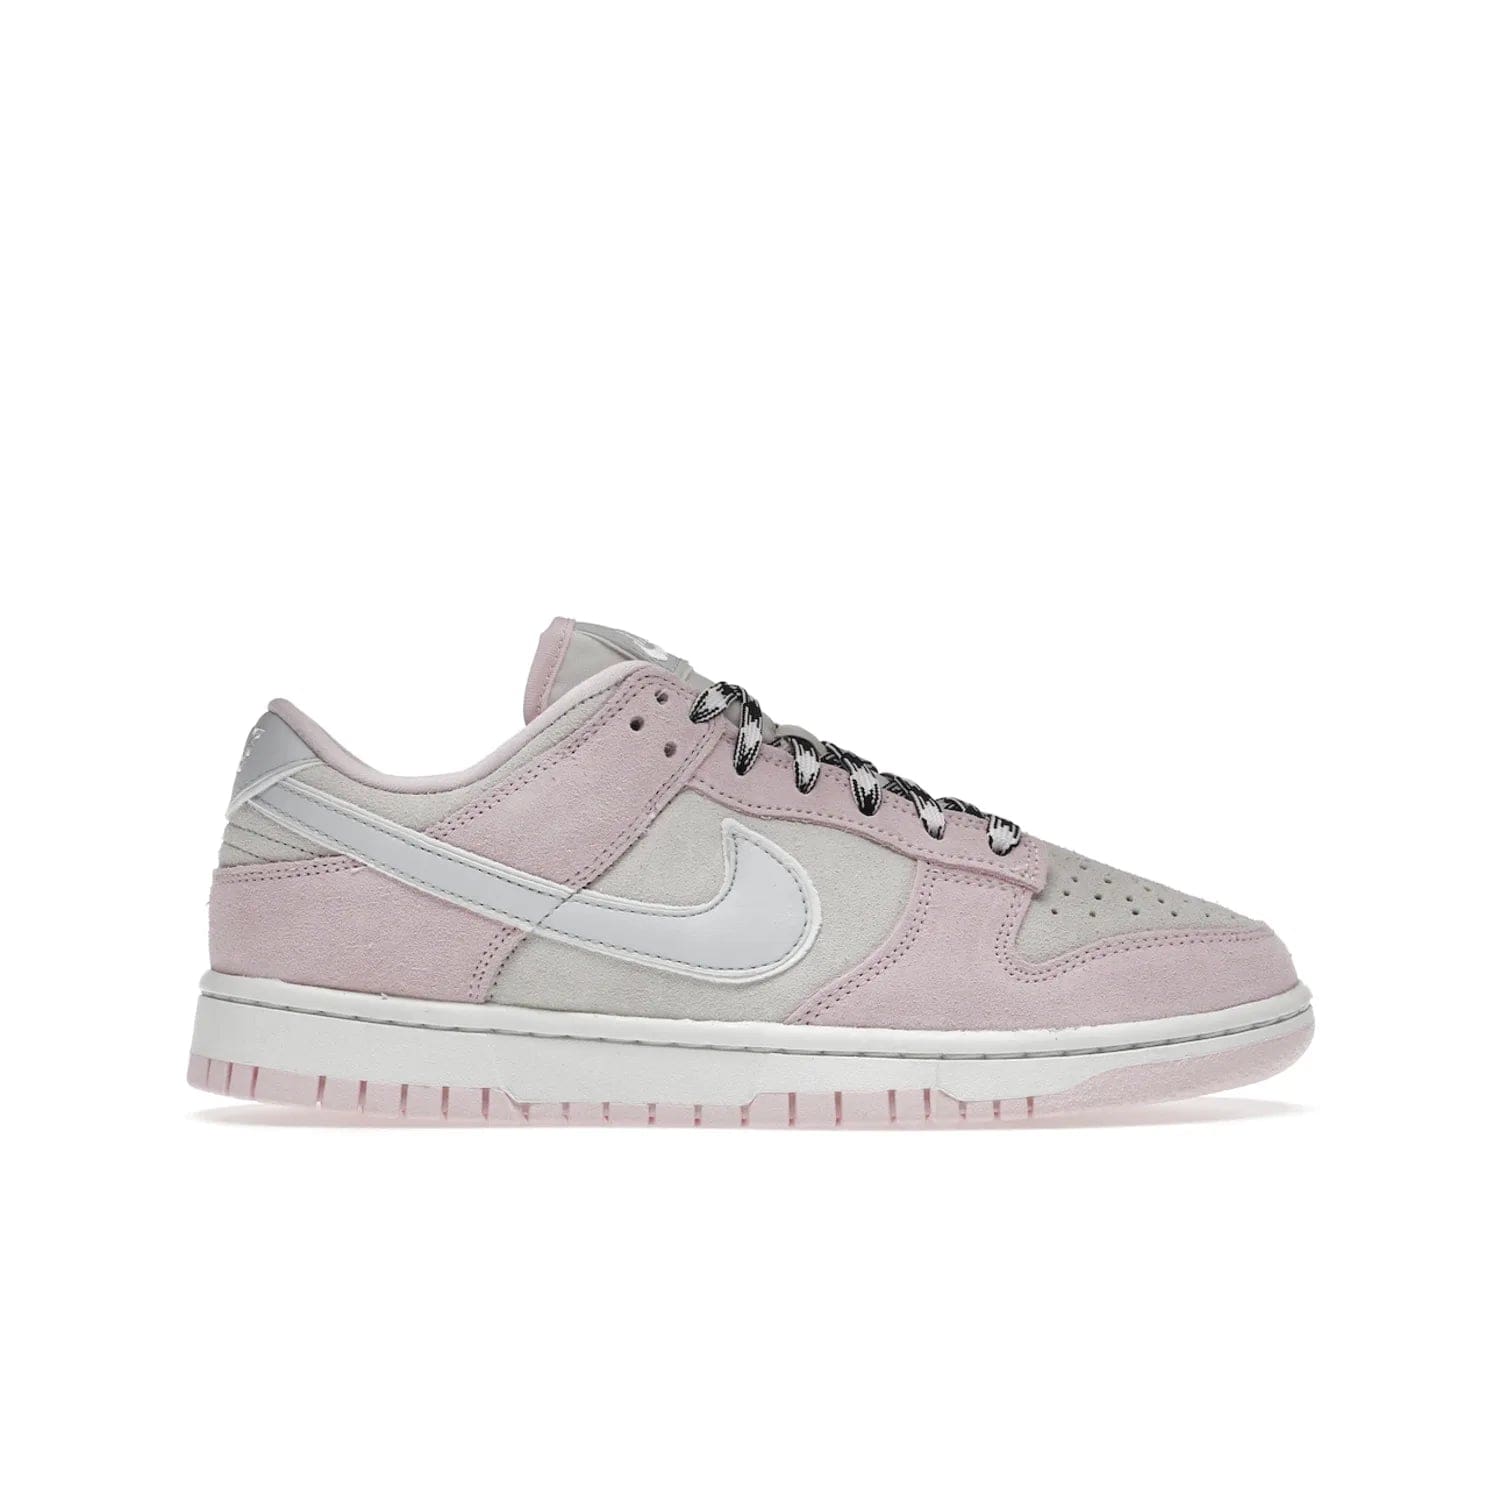 Nike Dunk Low LX Pink Foam (Women's) - Image 1 - Only at www.BallersClubKickz.com - Feminine & fashionable Nike Dunk Low LX Pink Foam W sneaker. Featuring leather and synthetic materials and durable rubber sole. Lace-up design ensures a snug fit. Released Dec. 10th 2022, $120. Stylish and comfortable.